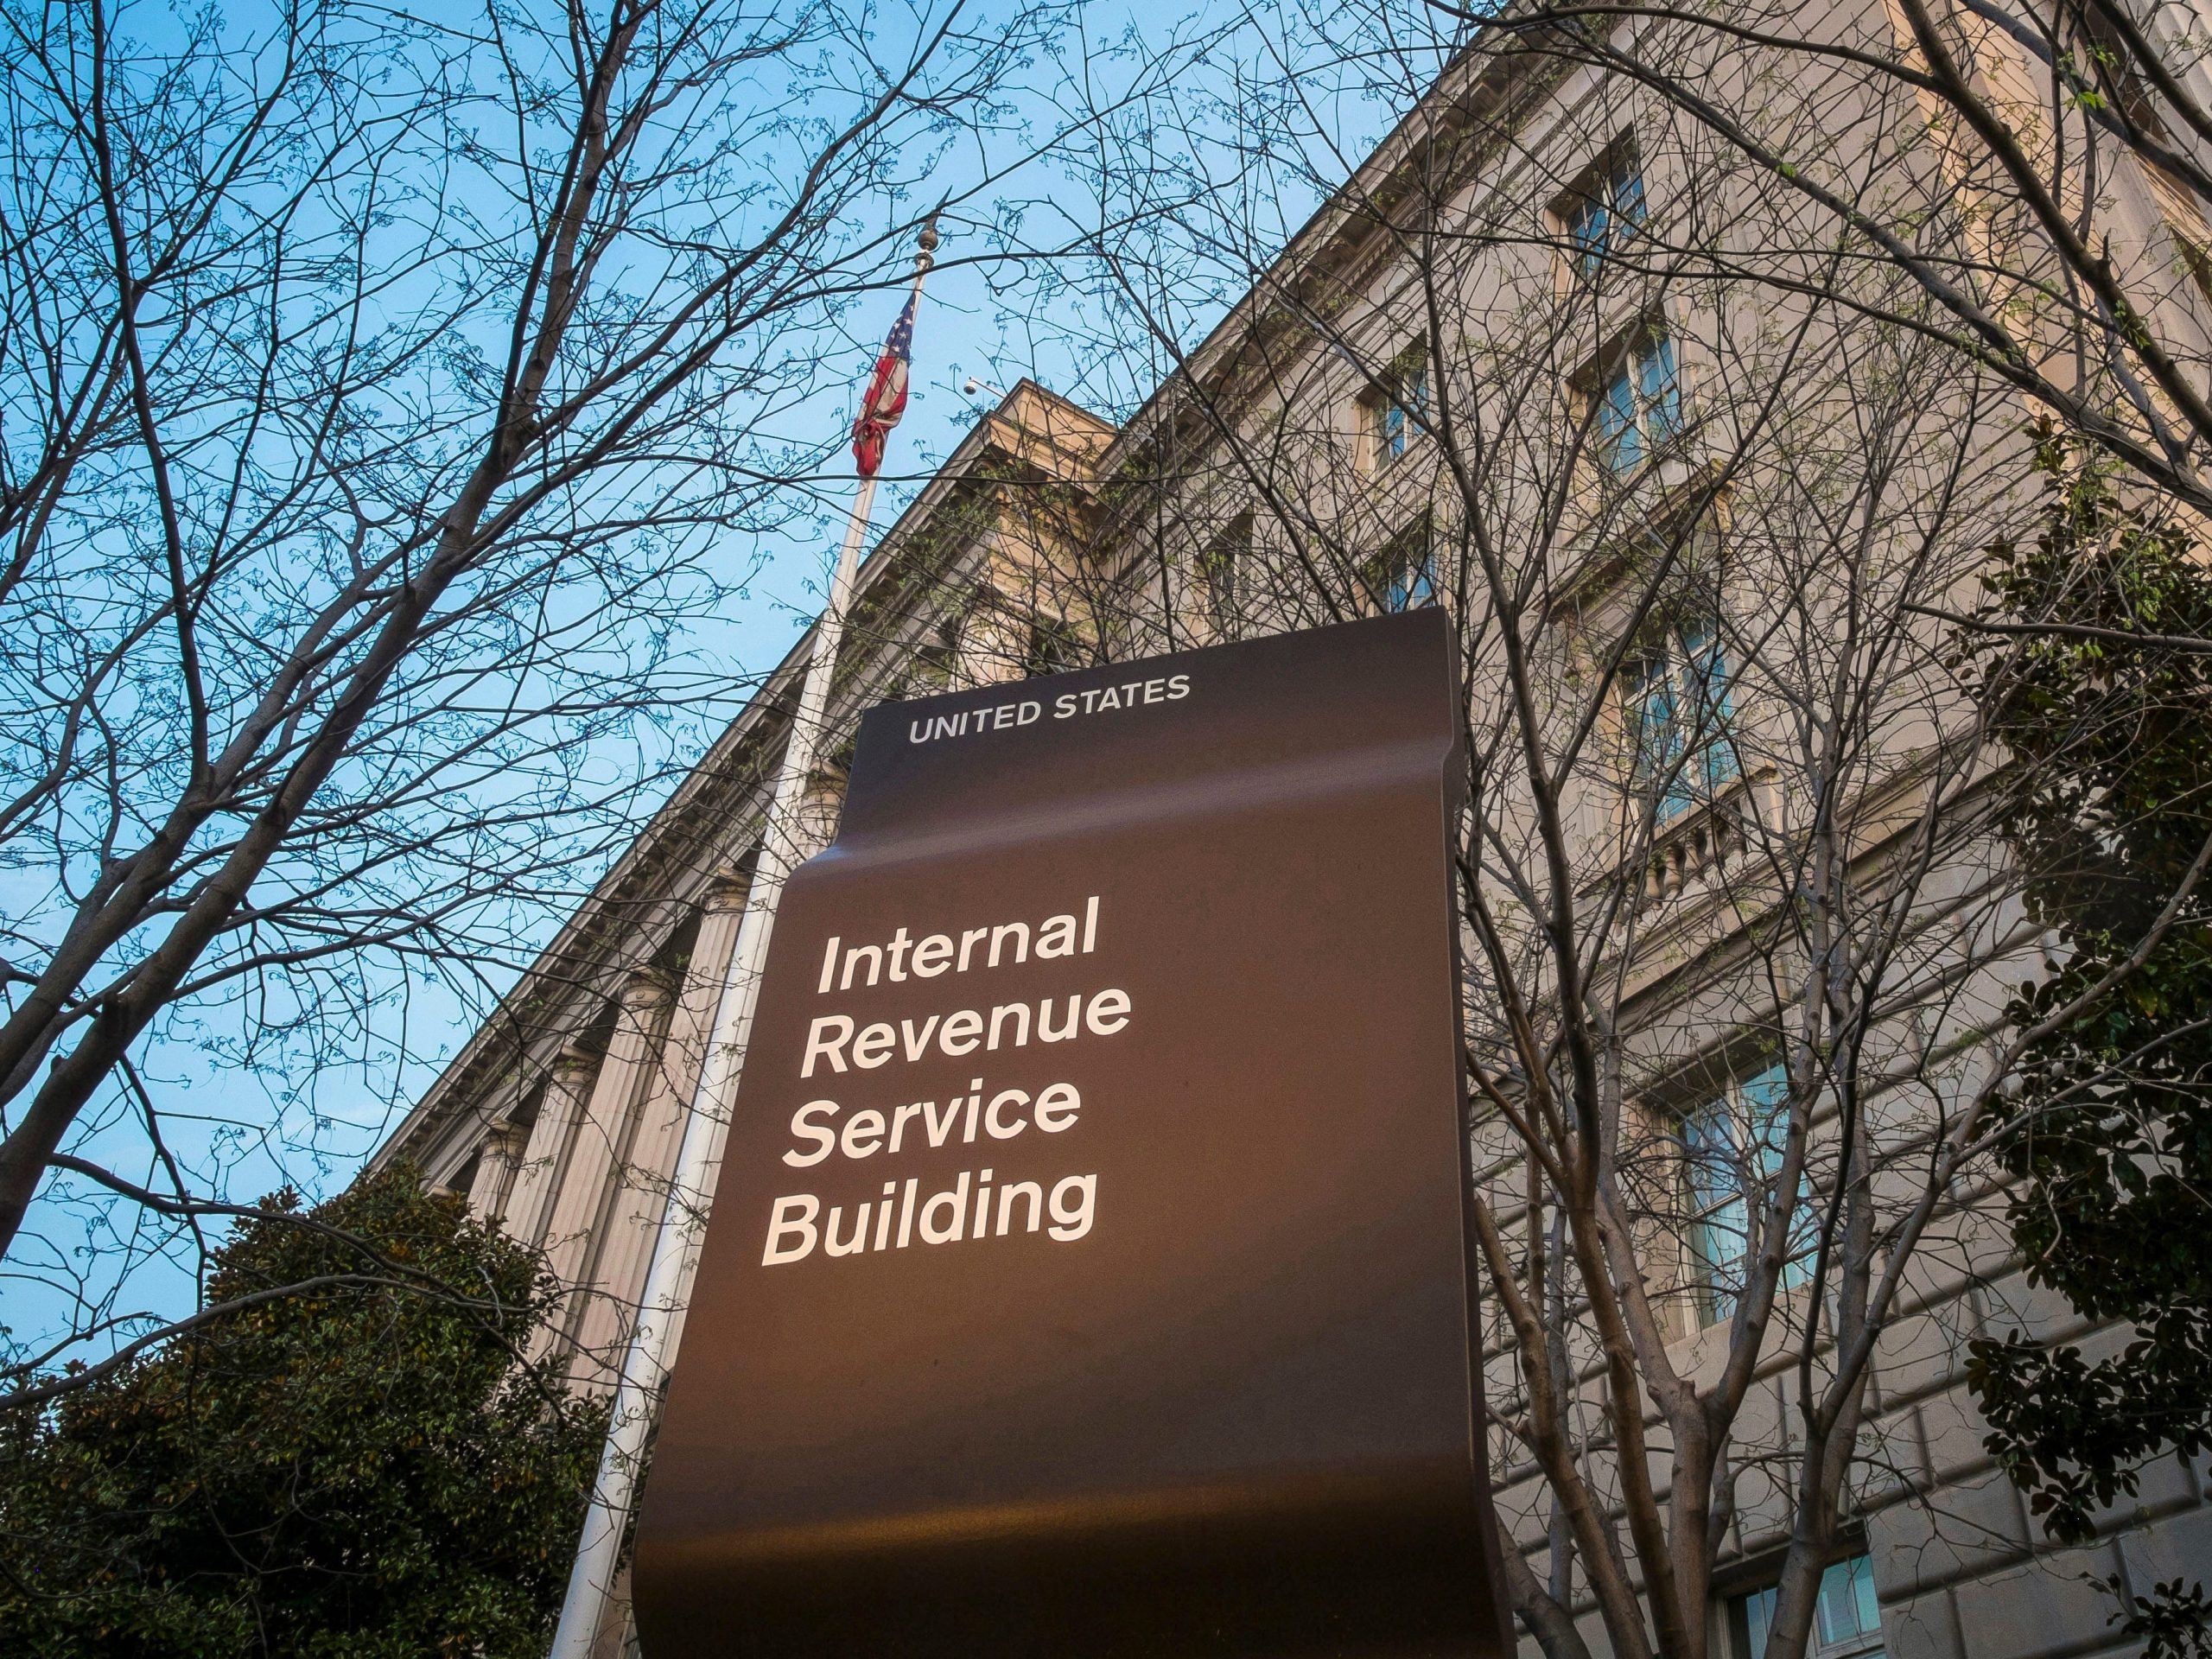 FILE - This April 13, 2014, file photo shows the Internal Revenue Service (IRS) headquarters building in Washington. The Treasury Department and the IRS are urging taxpayers who want to get their economic impact payments directly deposited to their bank accounts to enter their information online by Wednesday, May 11, 2020. The IRS said that people should use the “Get My Payment” tool on the IRS website by noon on Wednesday to provide their direct deposit information. (AP Photo/J. David Ake, File)